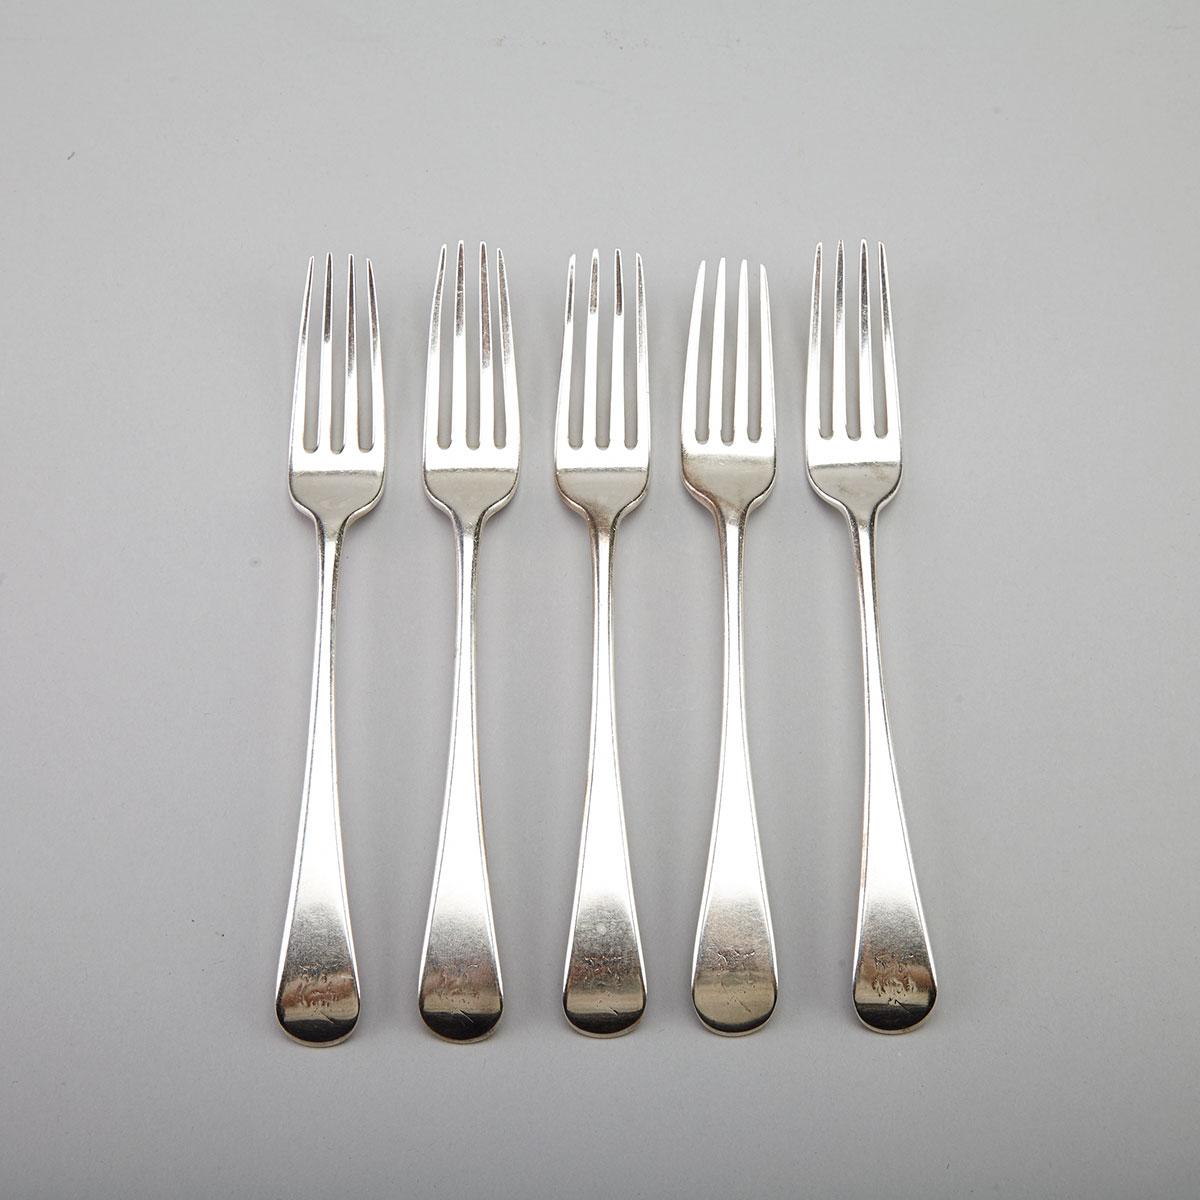 Five George III Silver Old English Pattern Table Forks, William Sumner, London, 1790